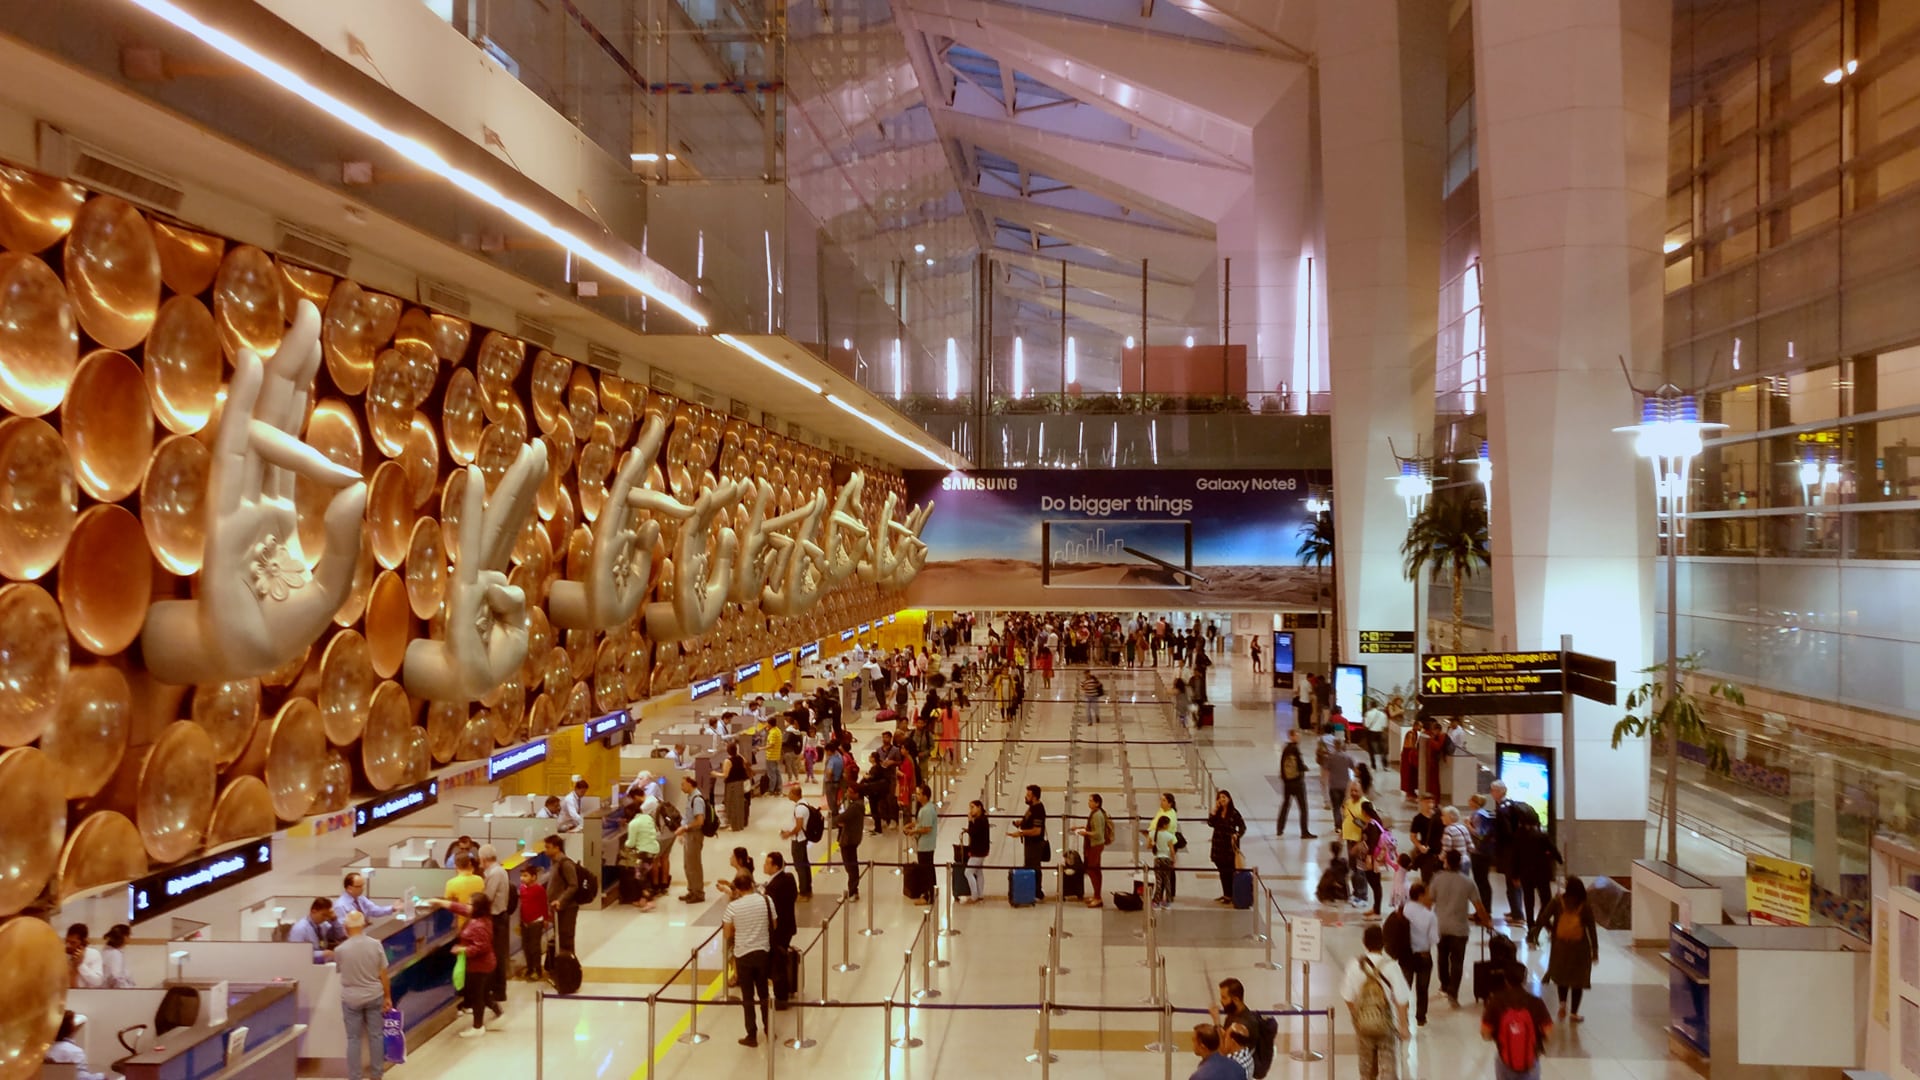 Delhi airport emerges as world's 10th busiest airport: Report